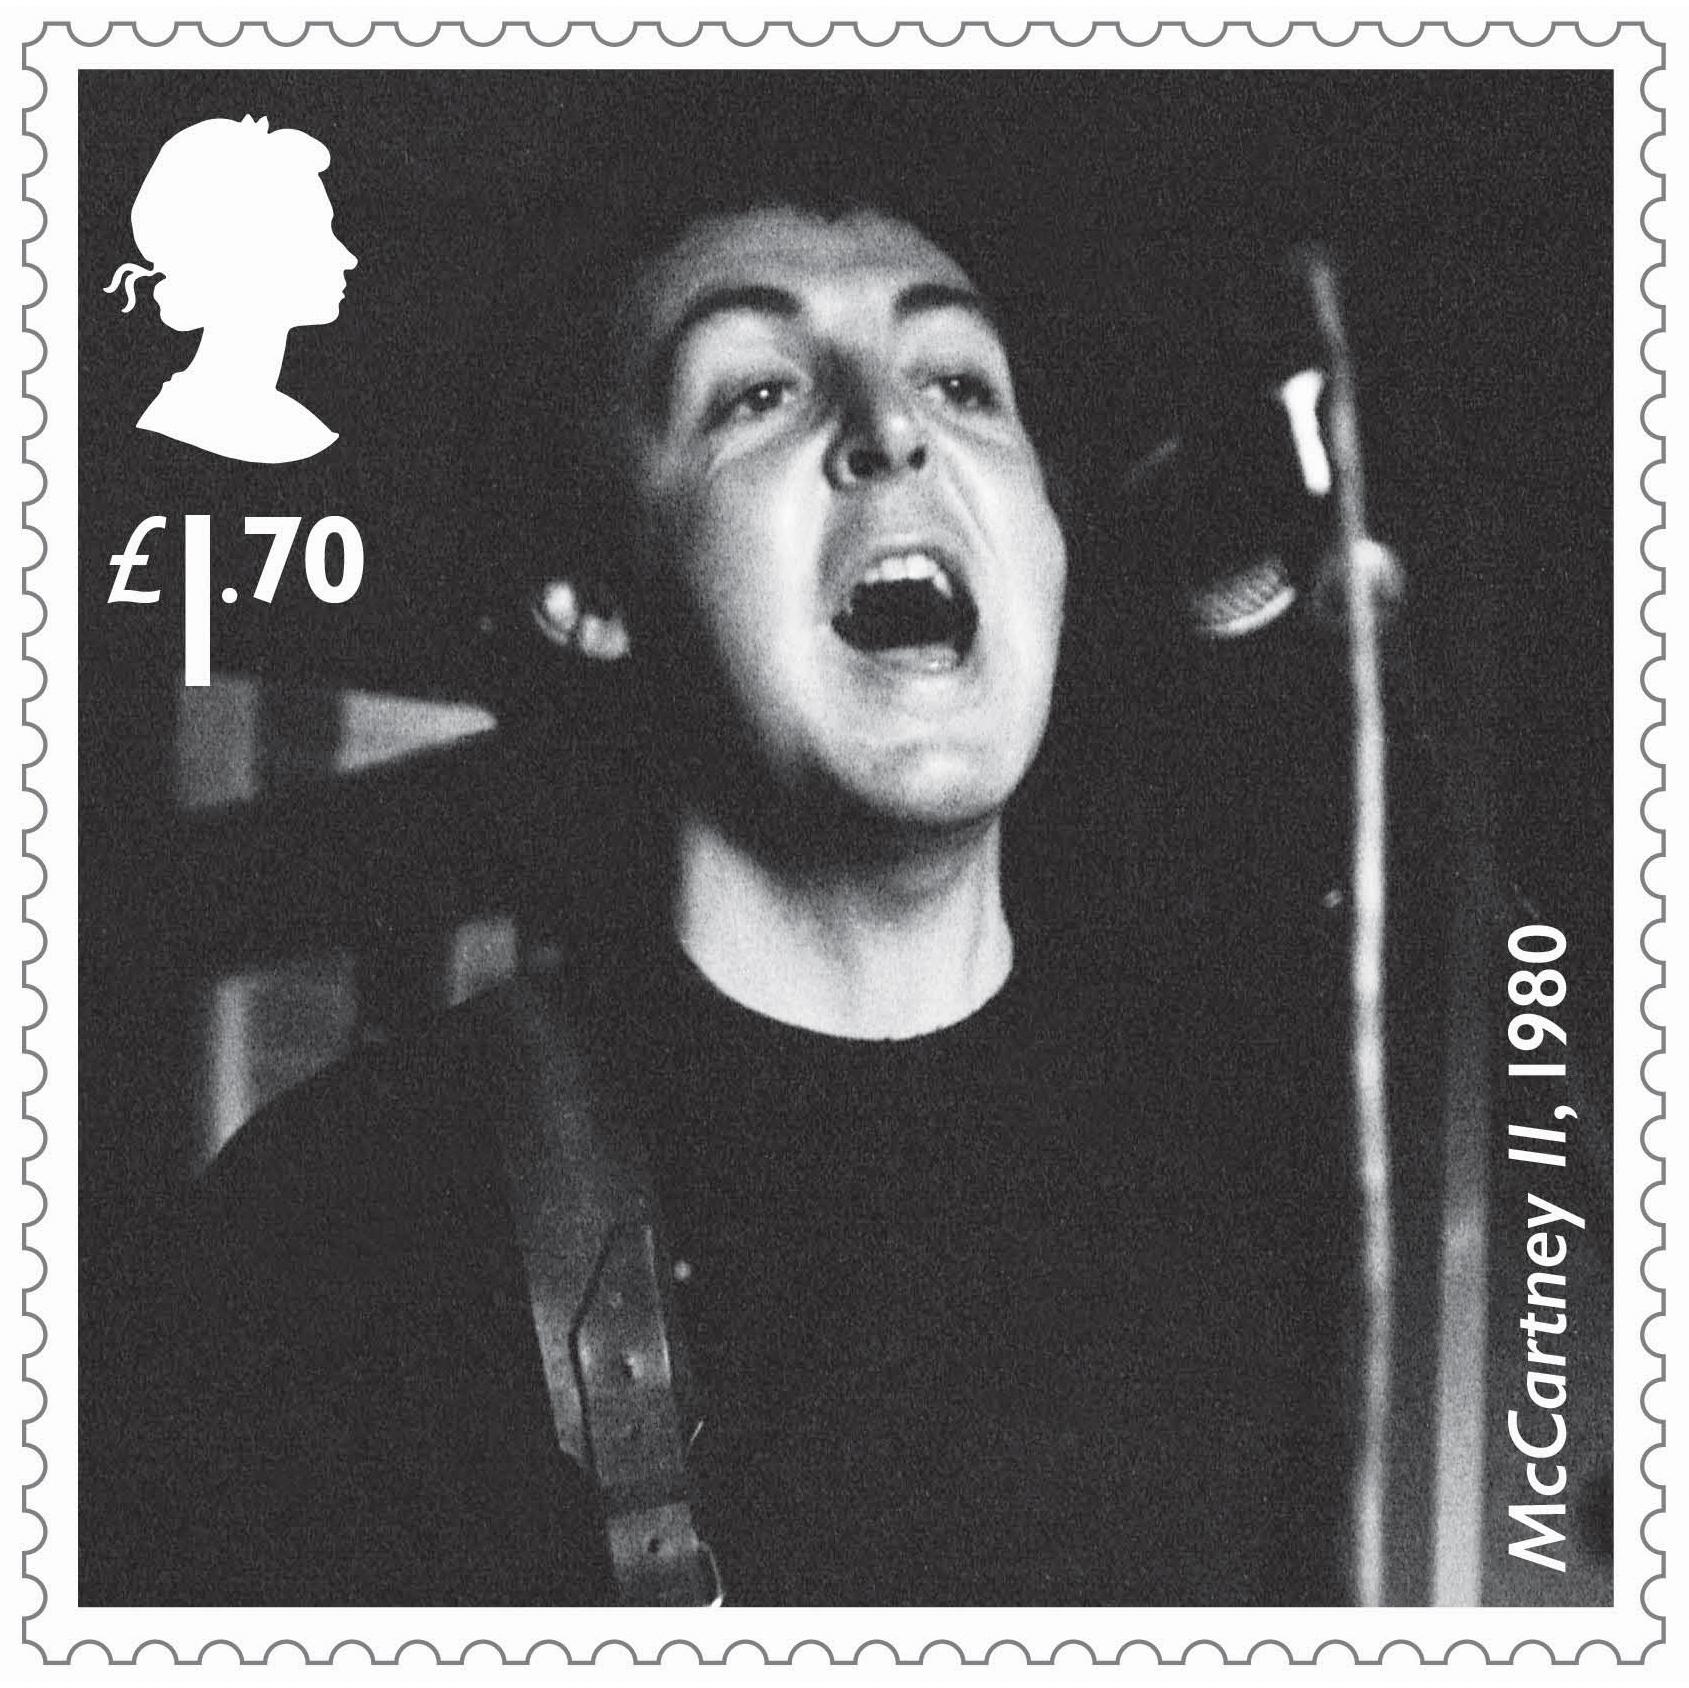 Sir Paul McCartney to be honoured with stamp collection